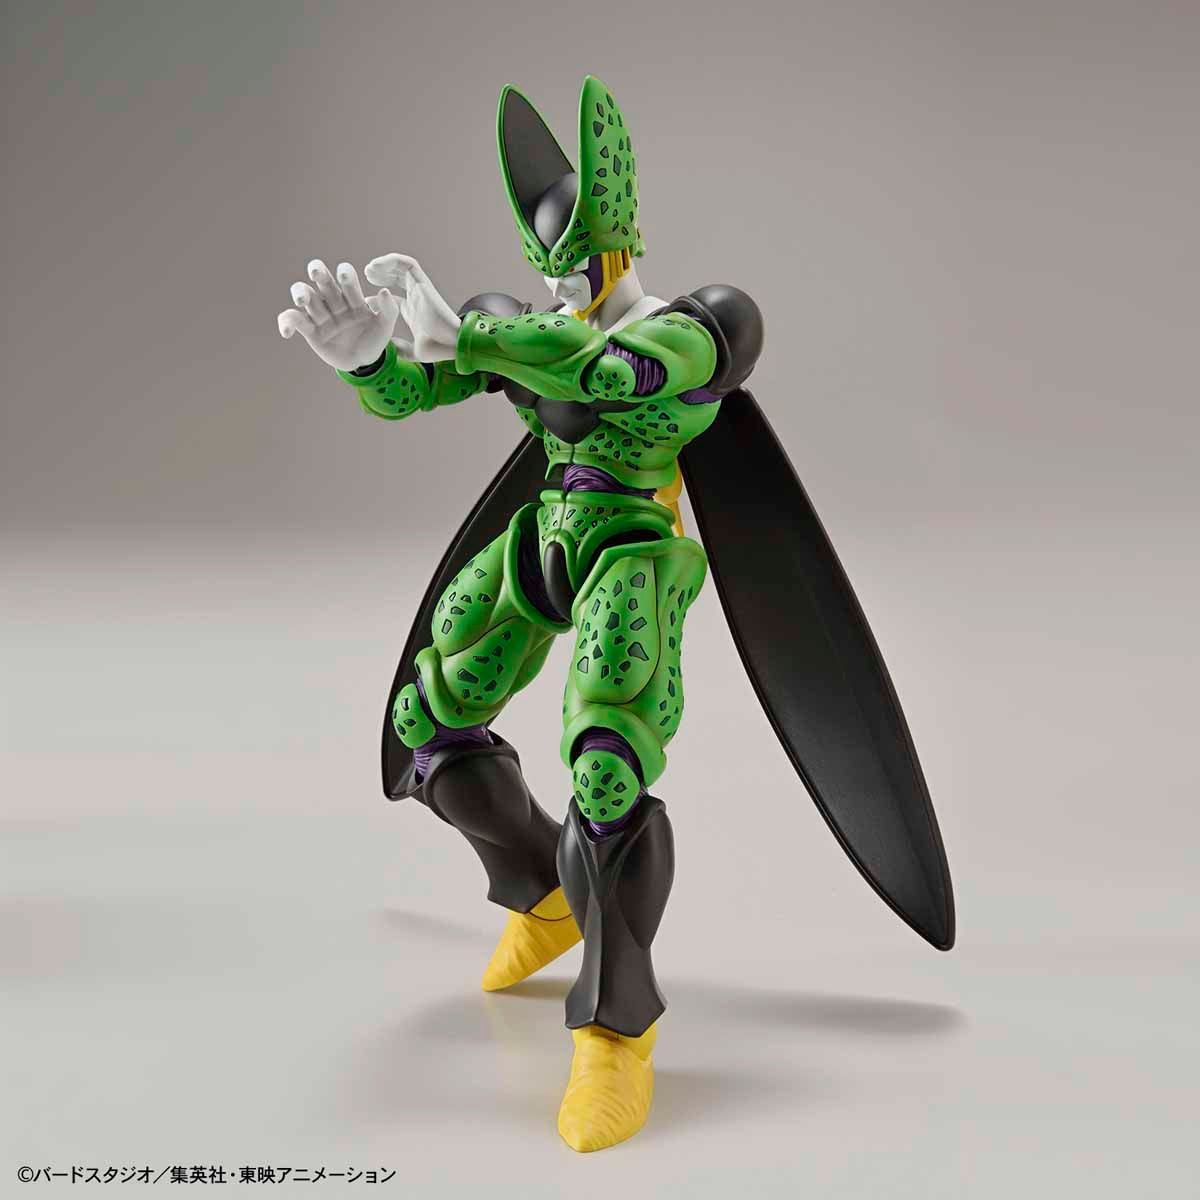 Dragon Ball - Perfect Cell - Figure-rise Standard Model Kit (Bandai), Includes 2 facial expression parts, 4 hand parts, 2 special attack effect parts, 1 base for the special attack effects, and 1 foil sticker sheet. Released on 2020-01-18. Sold by Nippon Figures.